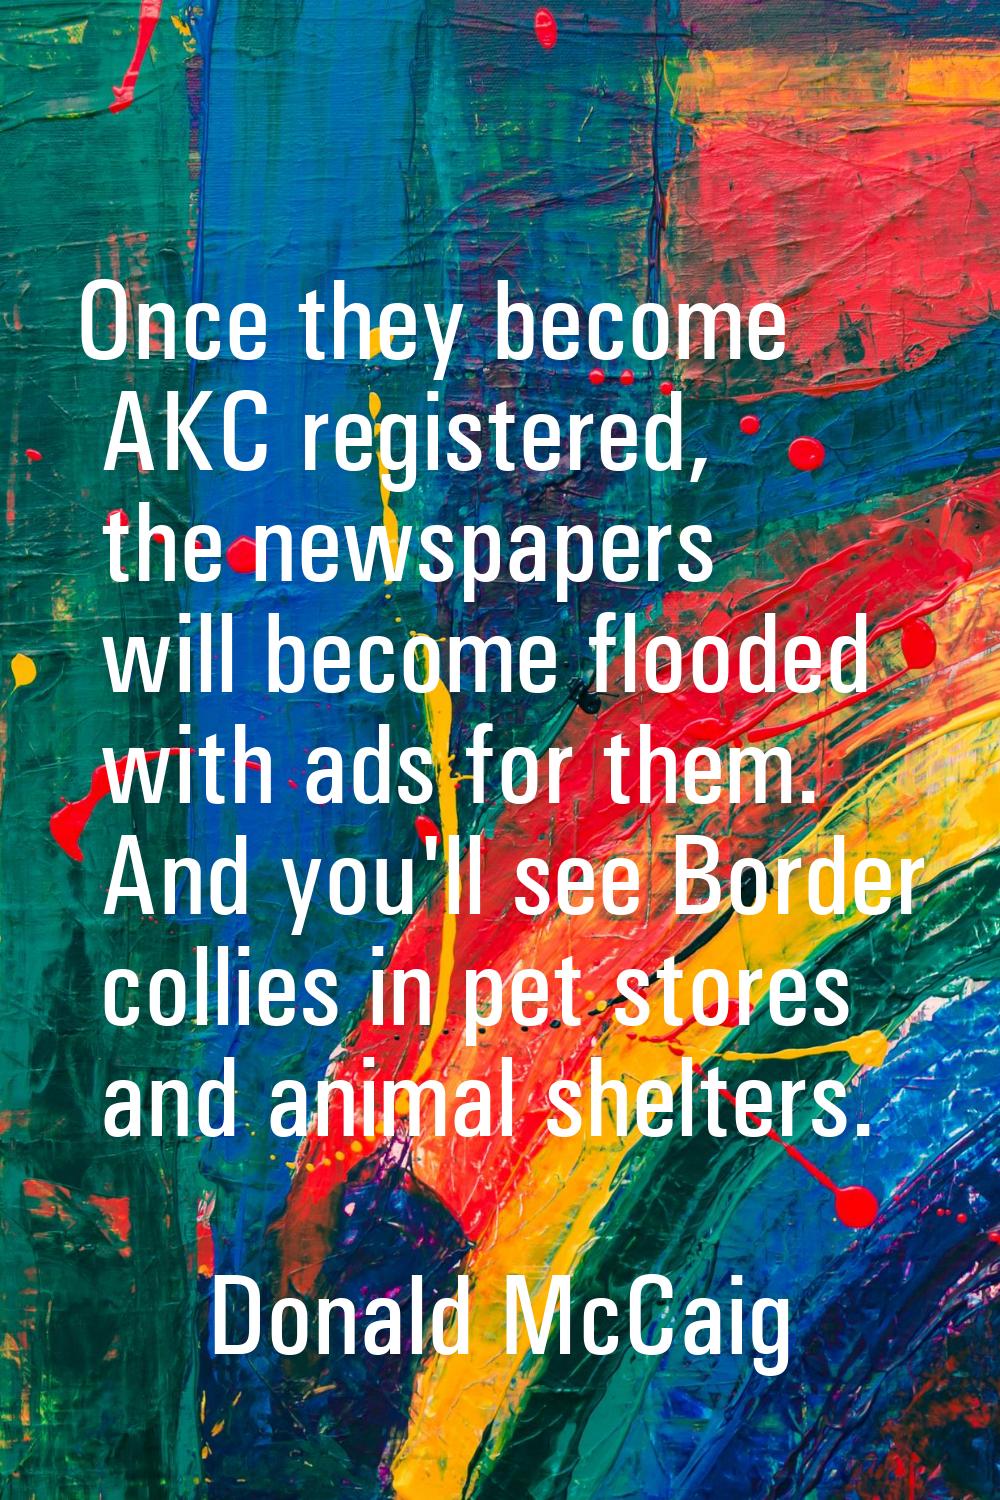 Once they become AKC registered, the newspapers will become flooded with ads for them. And you'll s